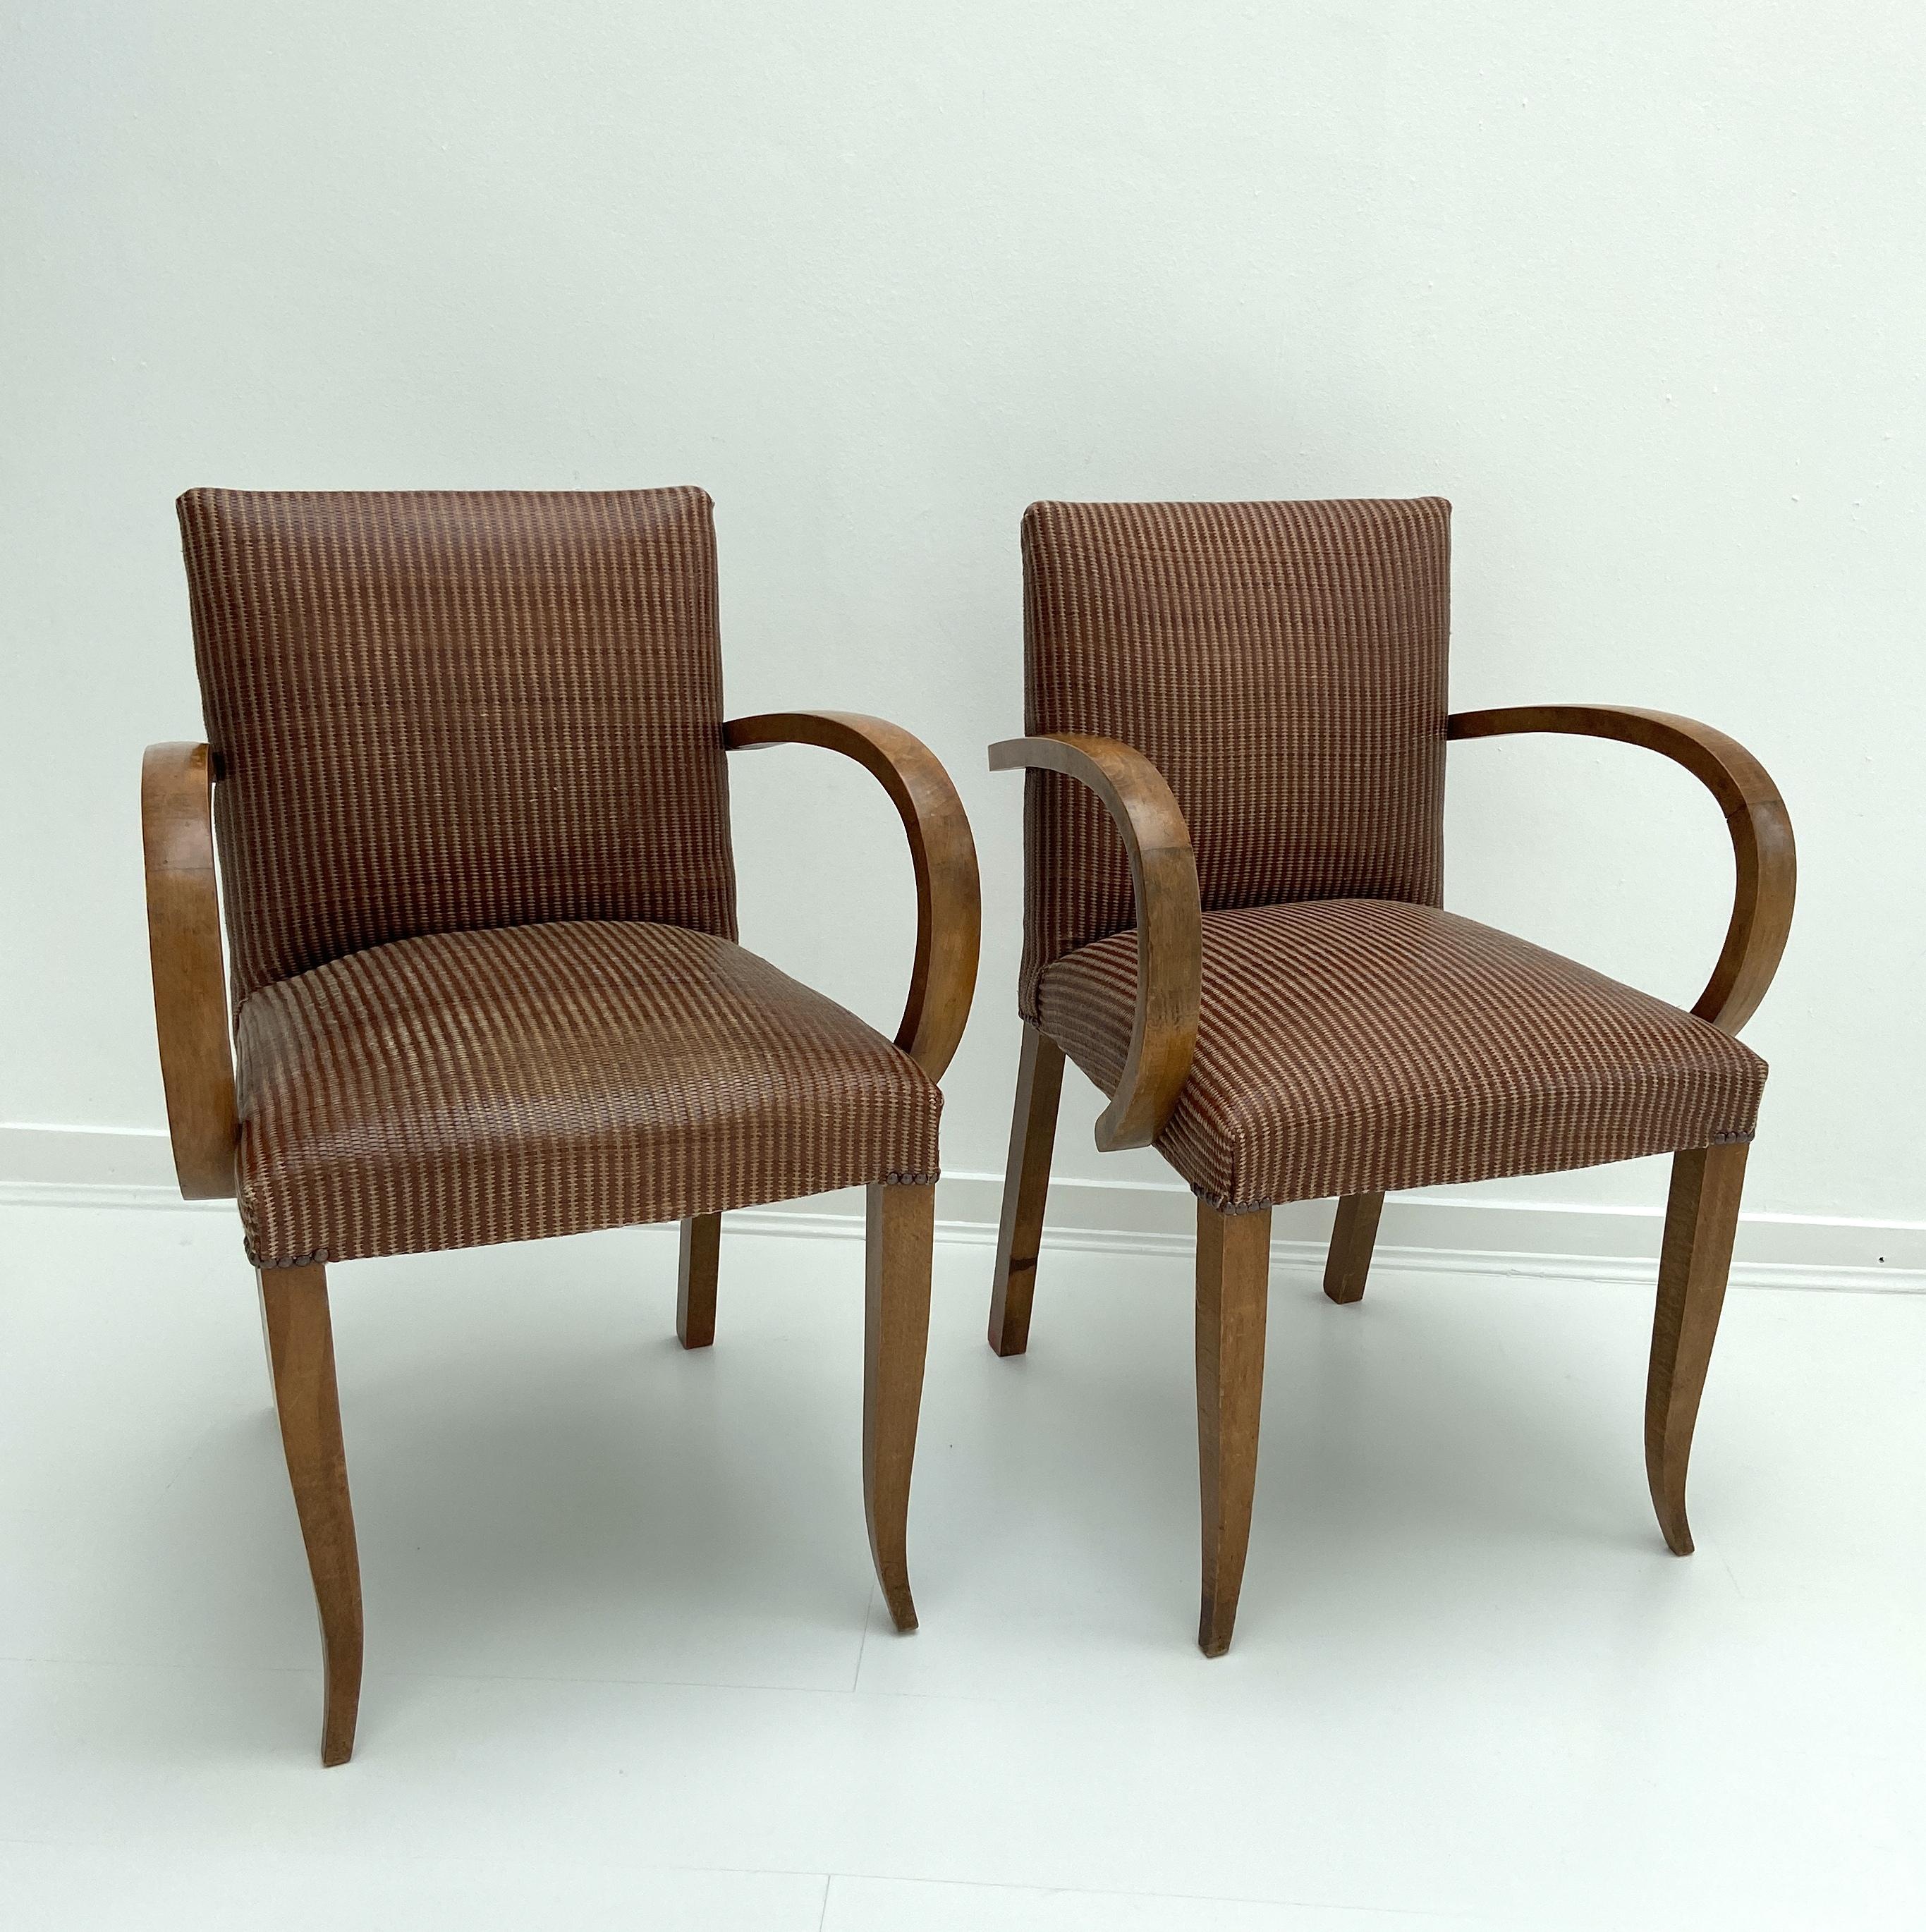 Mid-20th Century Pair of Modernist Bridge Chairs or Armchairs, French, 1930s